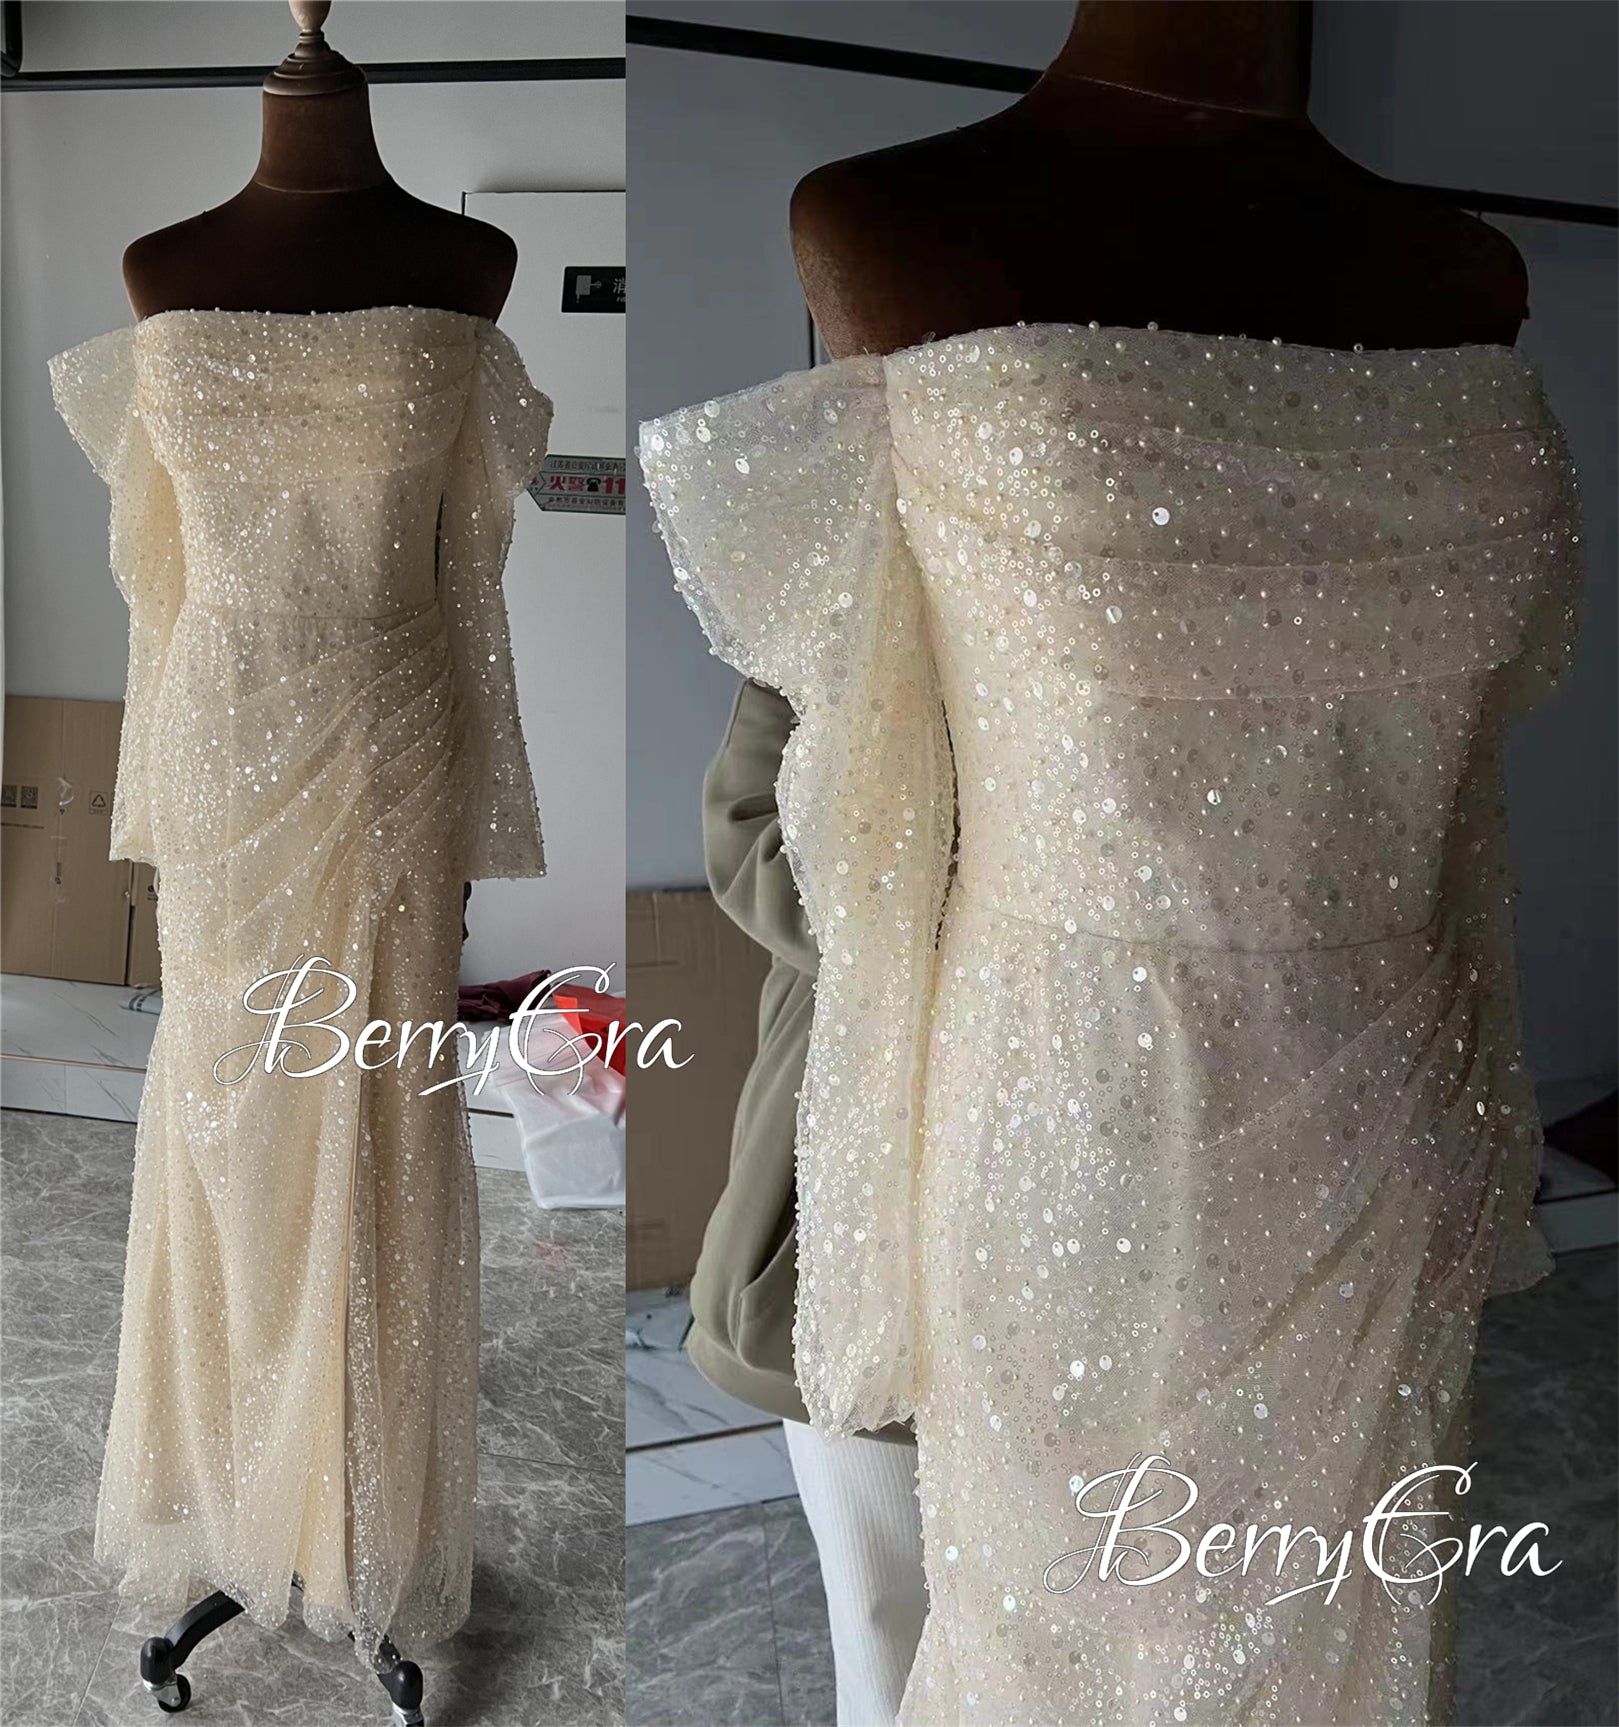 Long Sleeves Sequins Long Prom Dresses, Newest Side Silt Formal Dresses, Shiny Evening Party Dresses